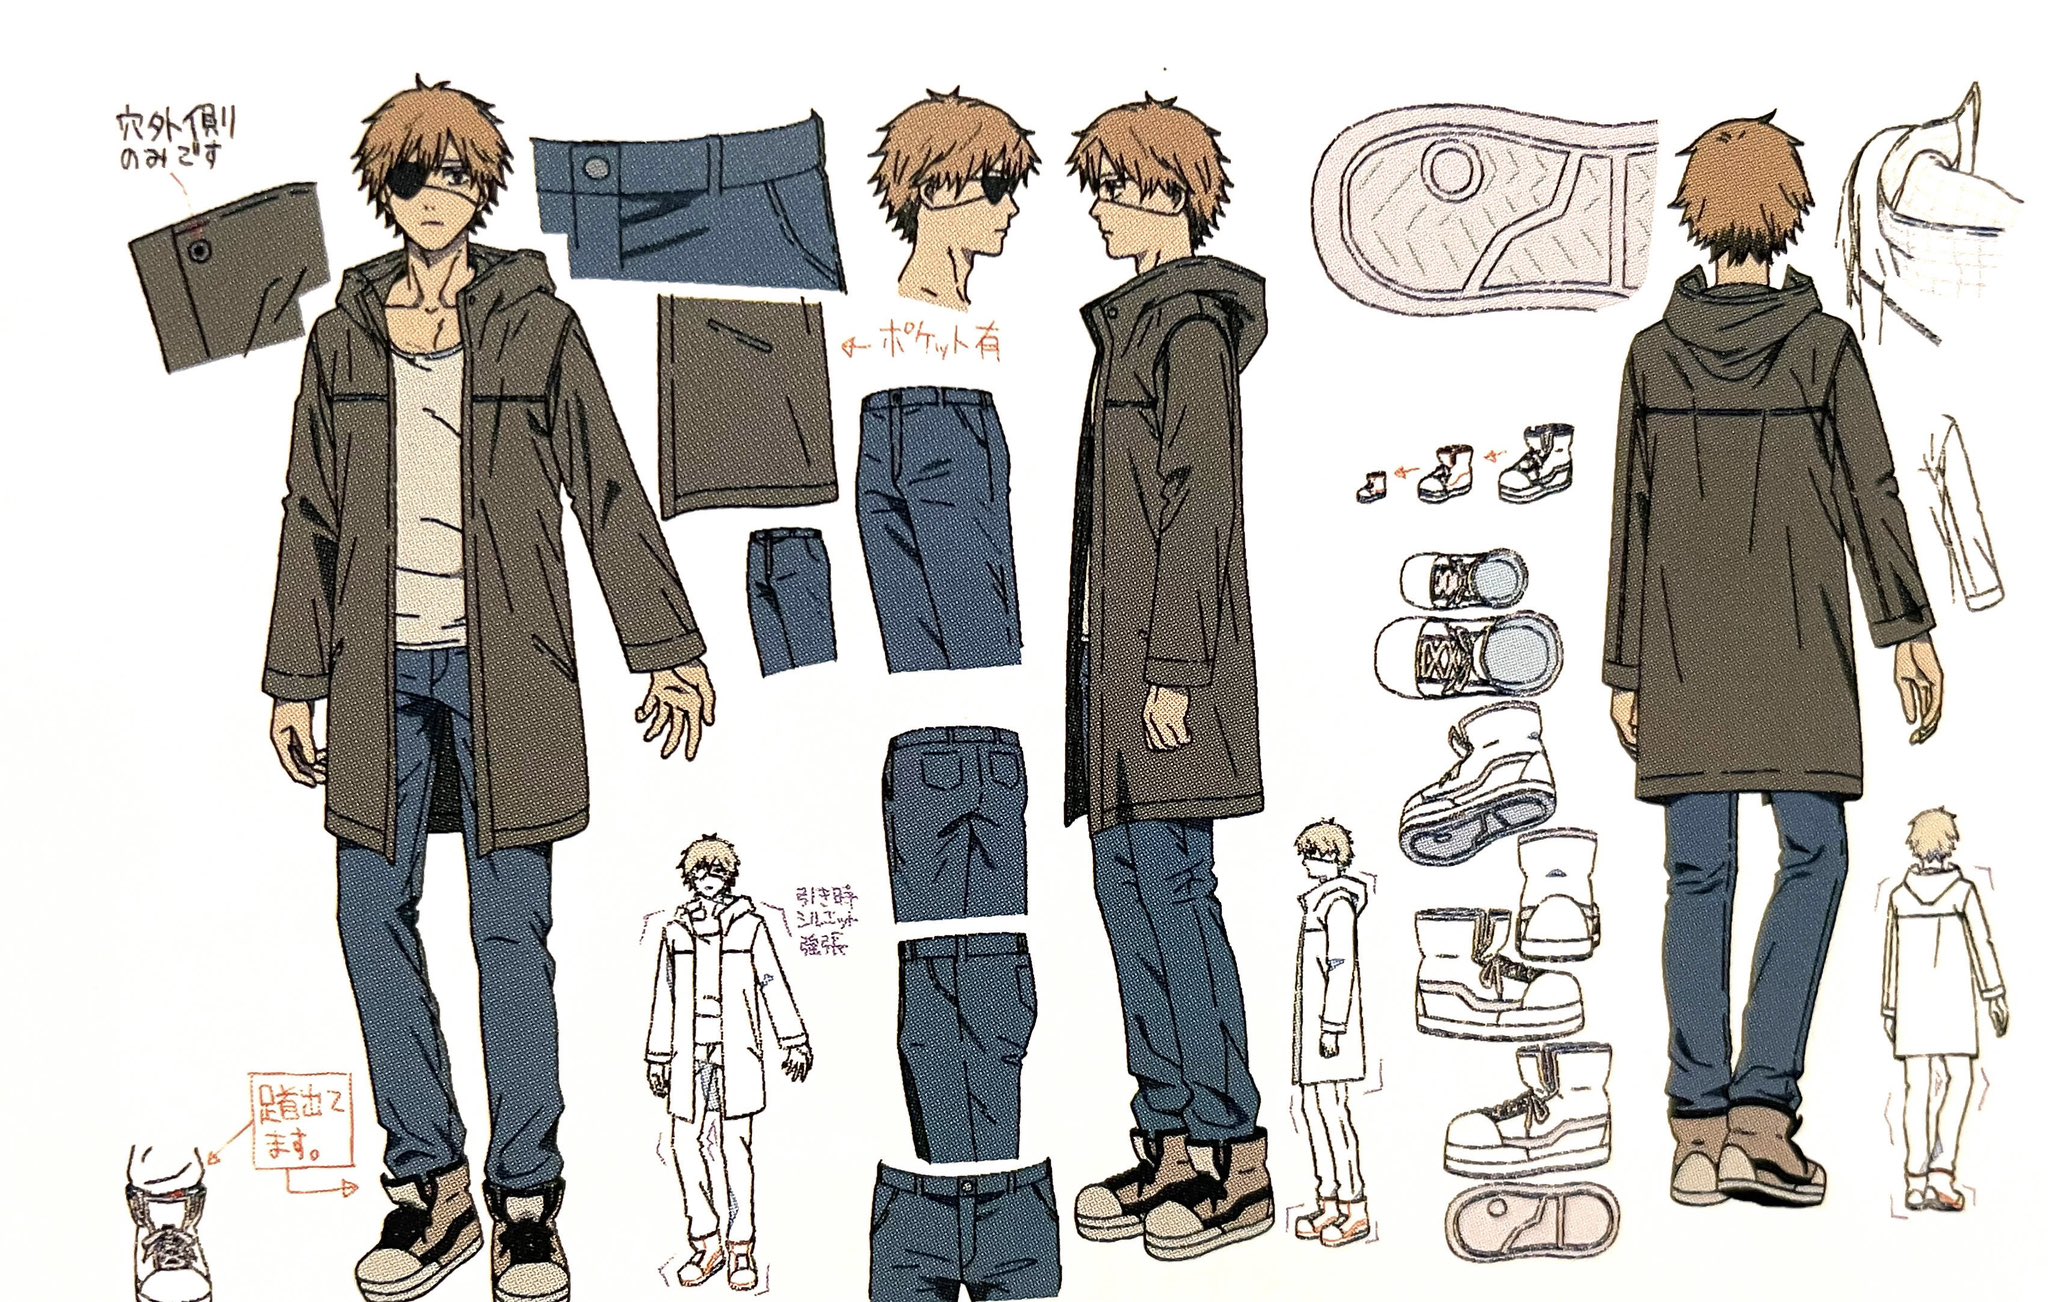 Chainsaw Man Anime Shares Character Designs